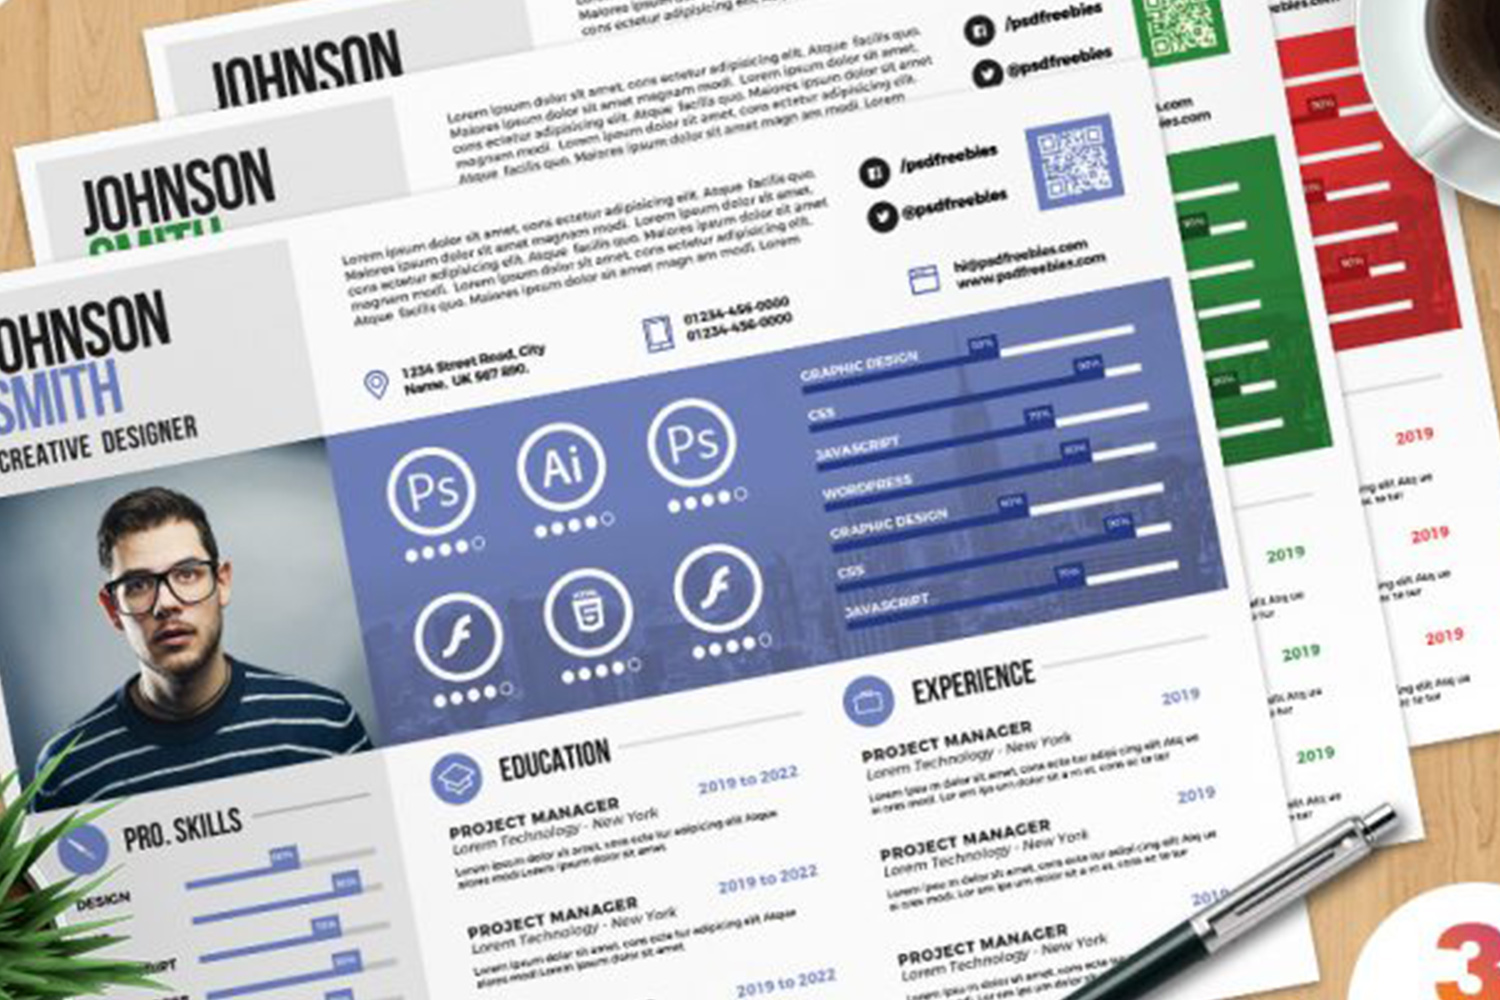 A4 Landscape Resume Template PSD Free Download